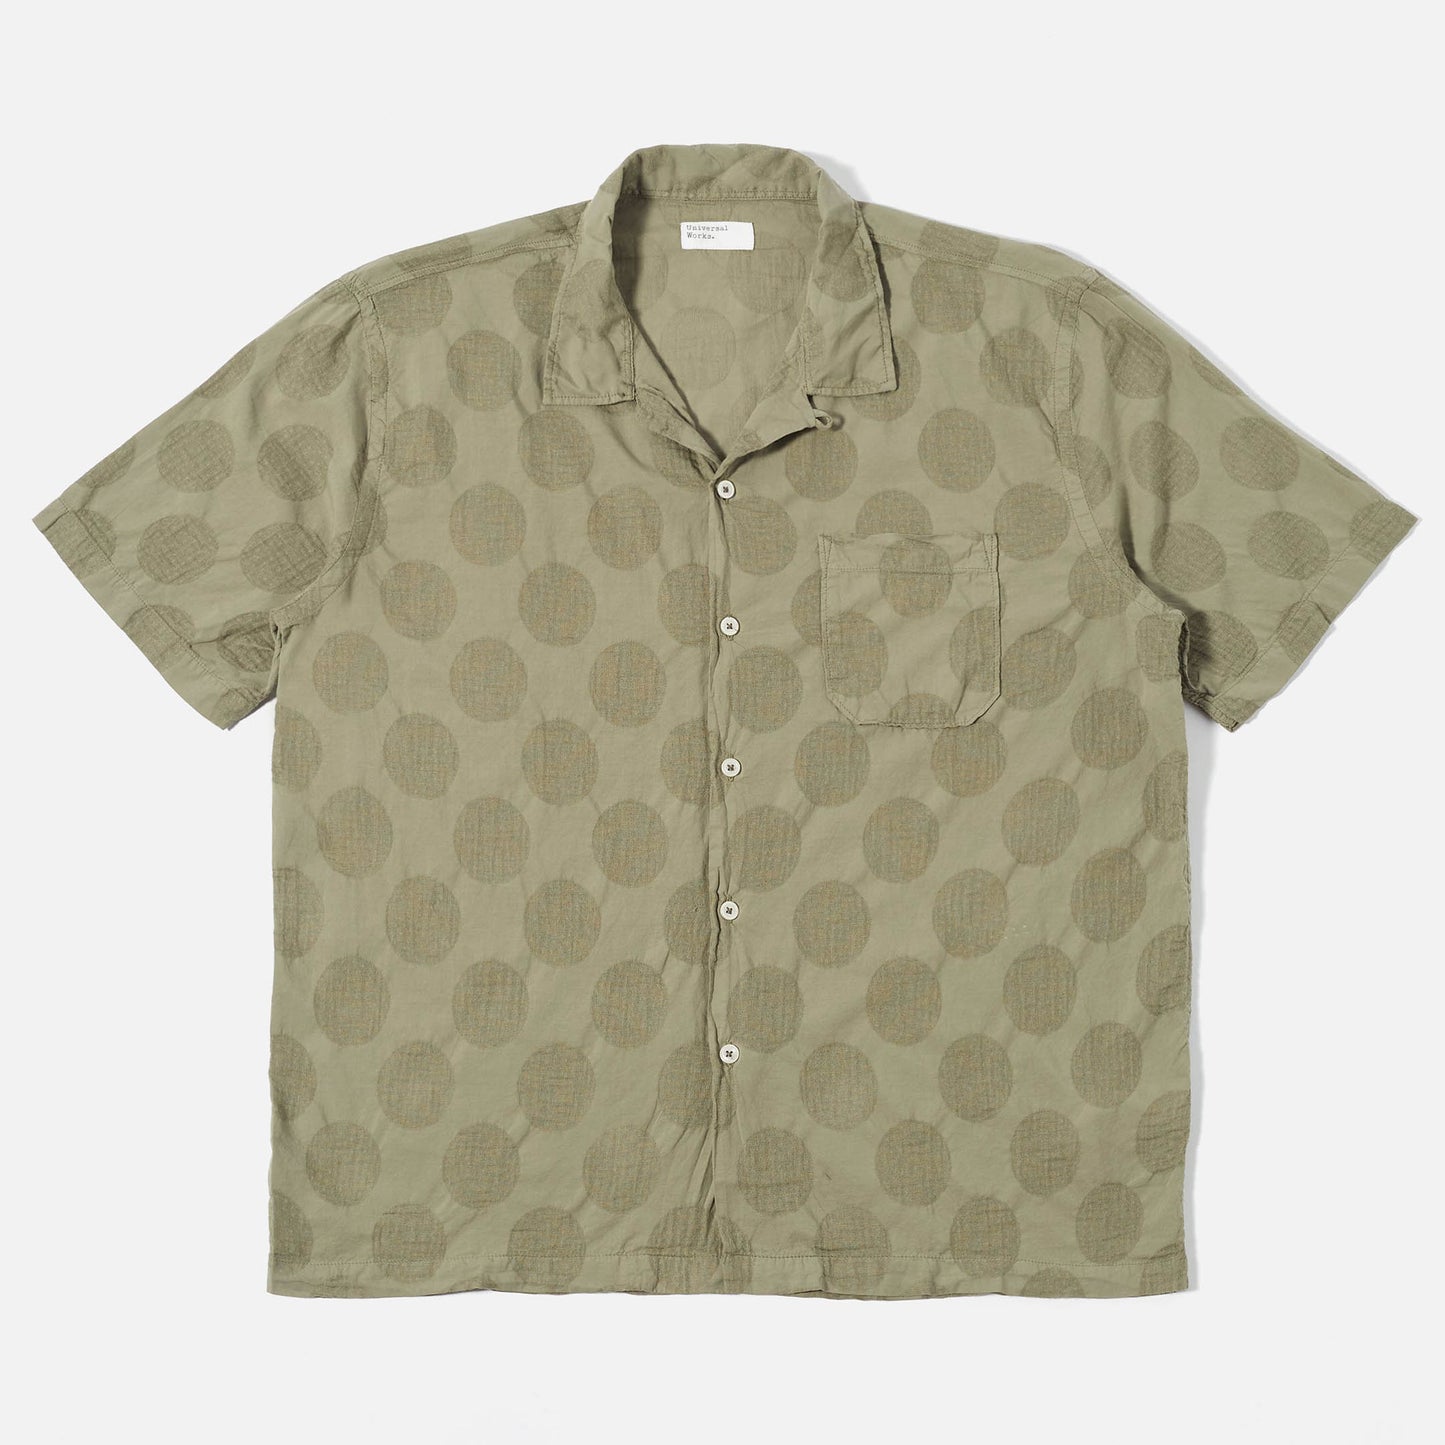 Road Shirt in Olive Dot Cotton